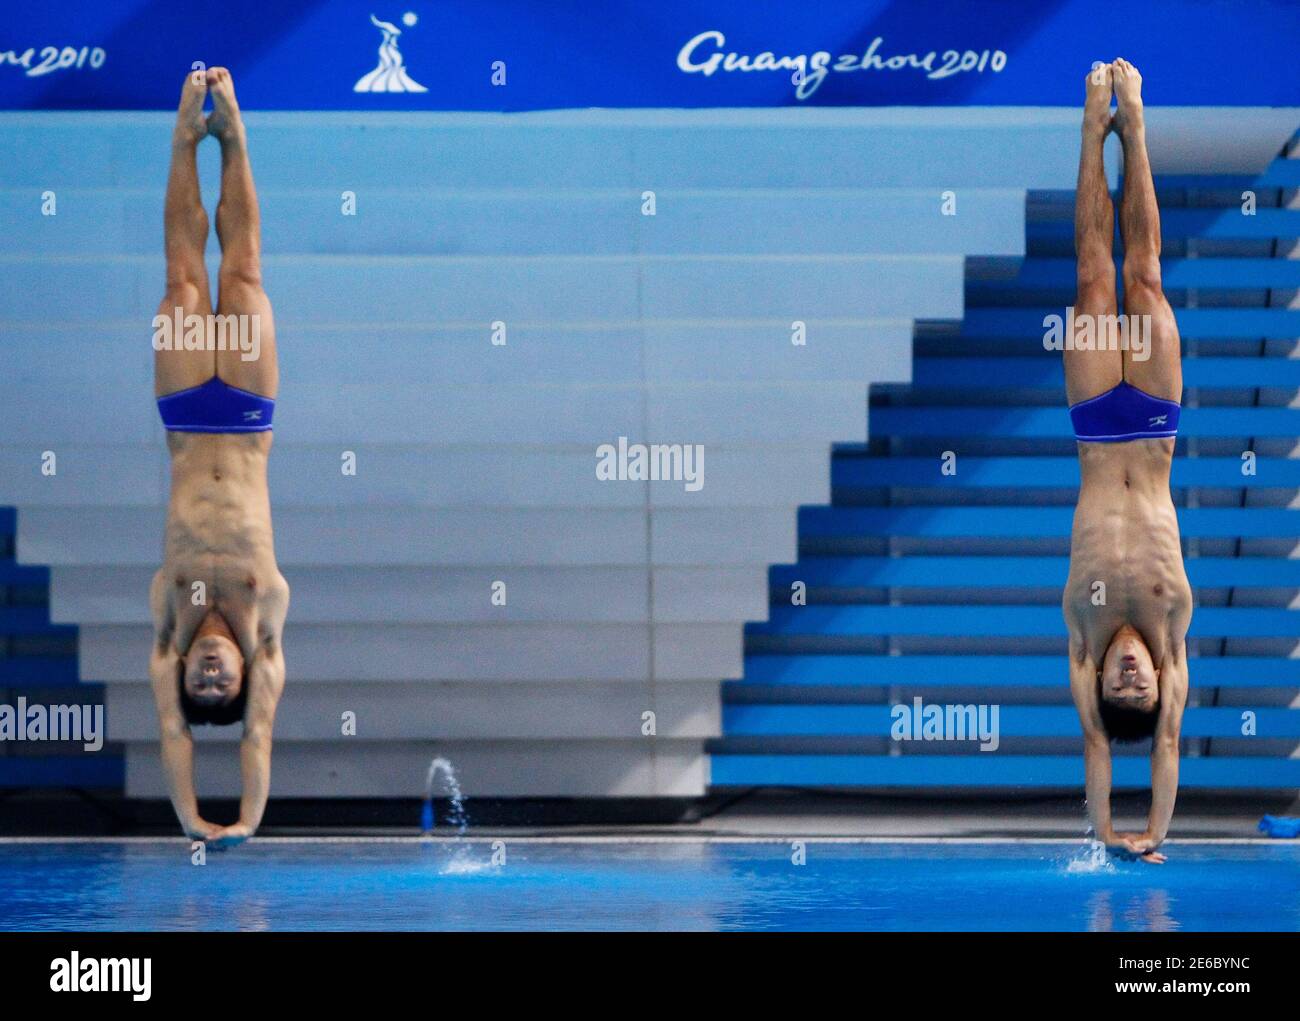 Yu Okamoto and Sho Sakai of Japan compete in the men's synchronized 3m springboard diving event at the 16th Asian Games in Guangzhou, Guangdong province, November 23, 2010. REUTERS/Jason Lee (CHINA  - Tags: SPORT DIVING) Stock Photo